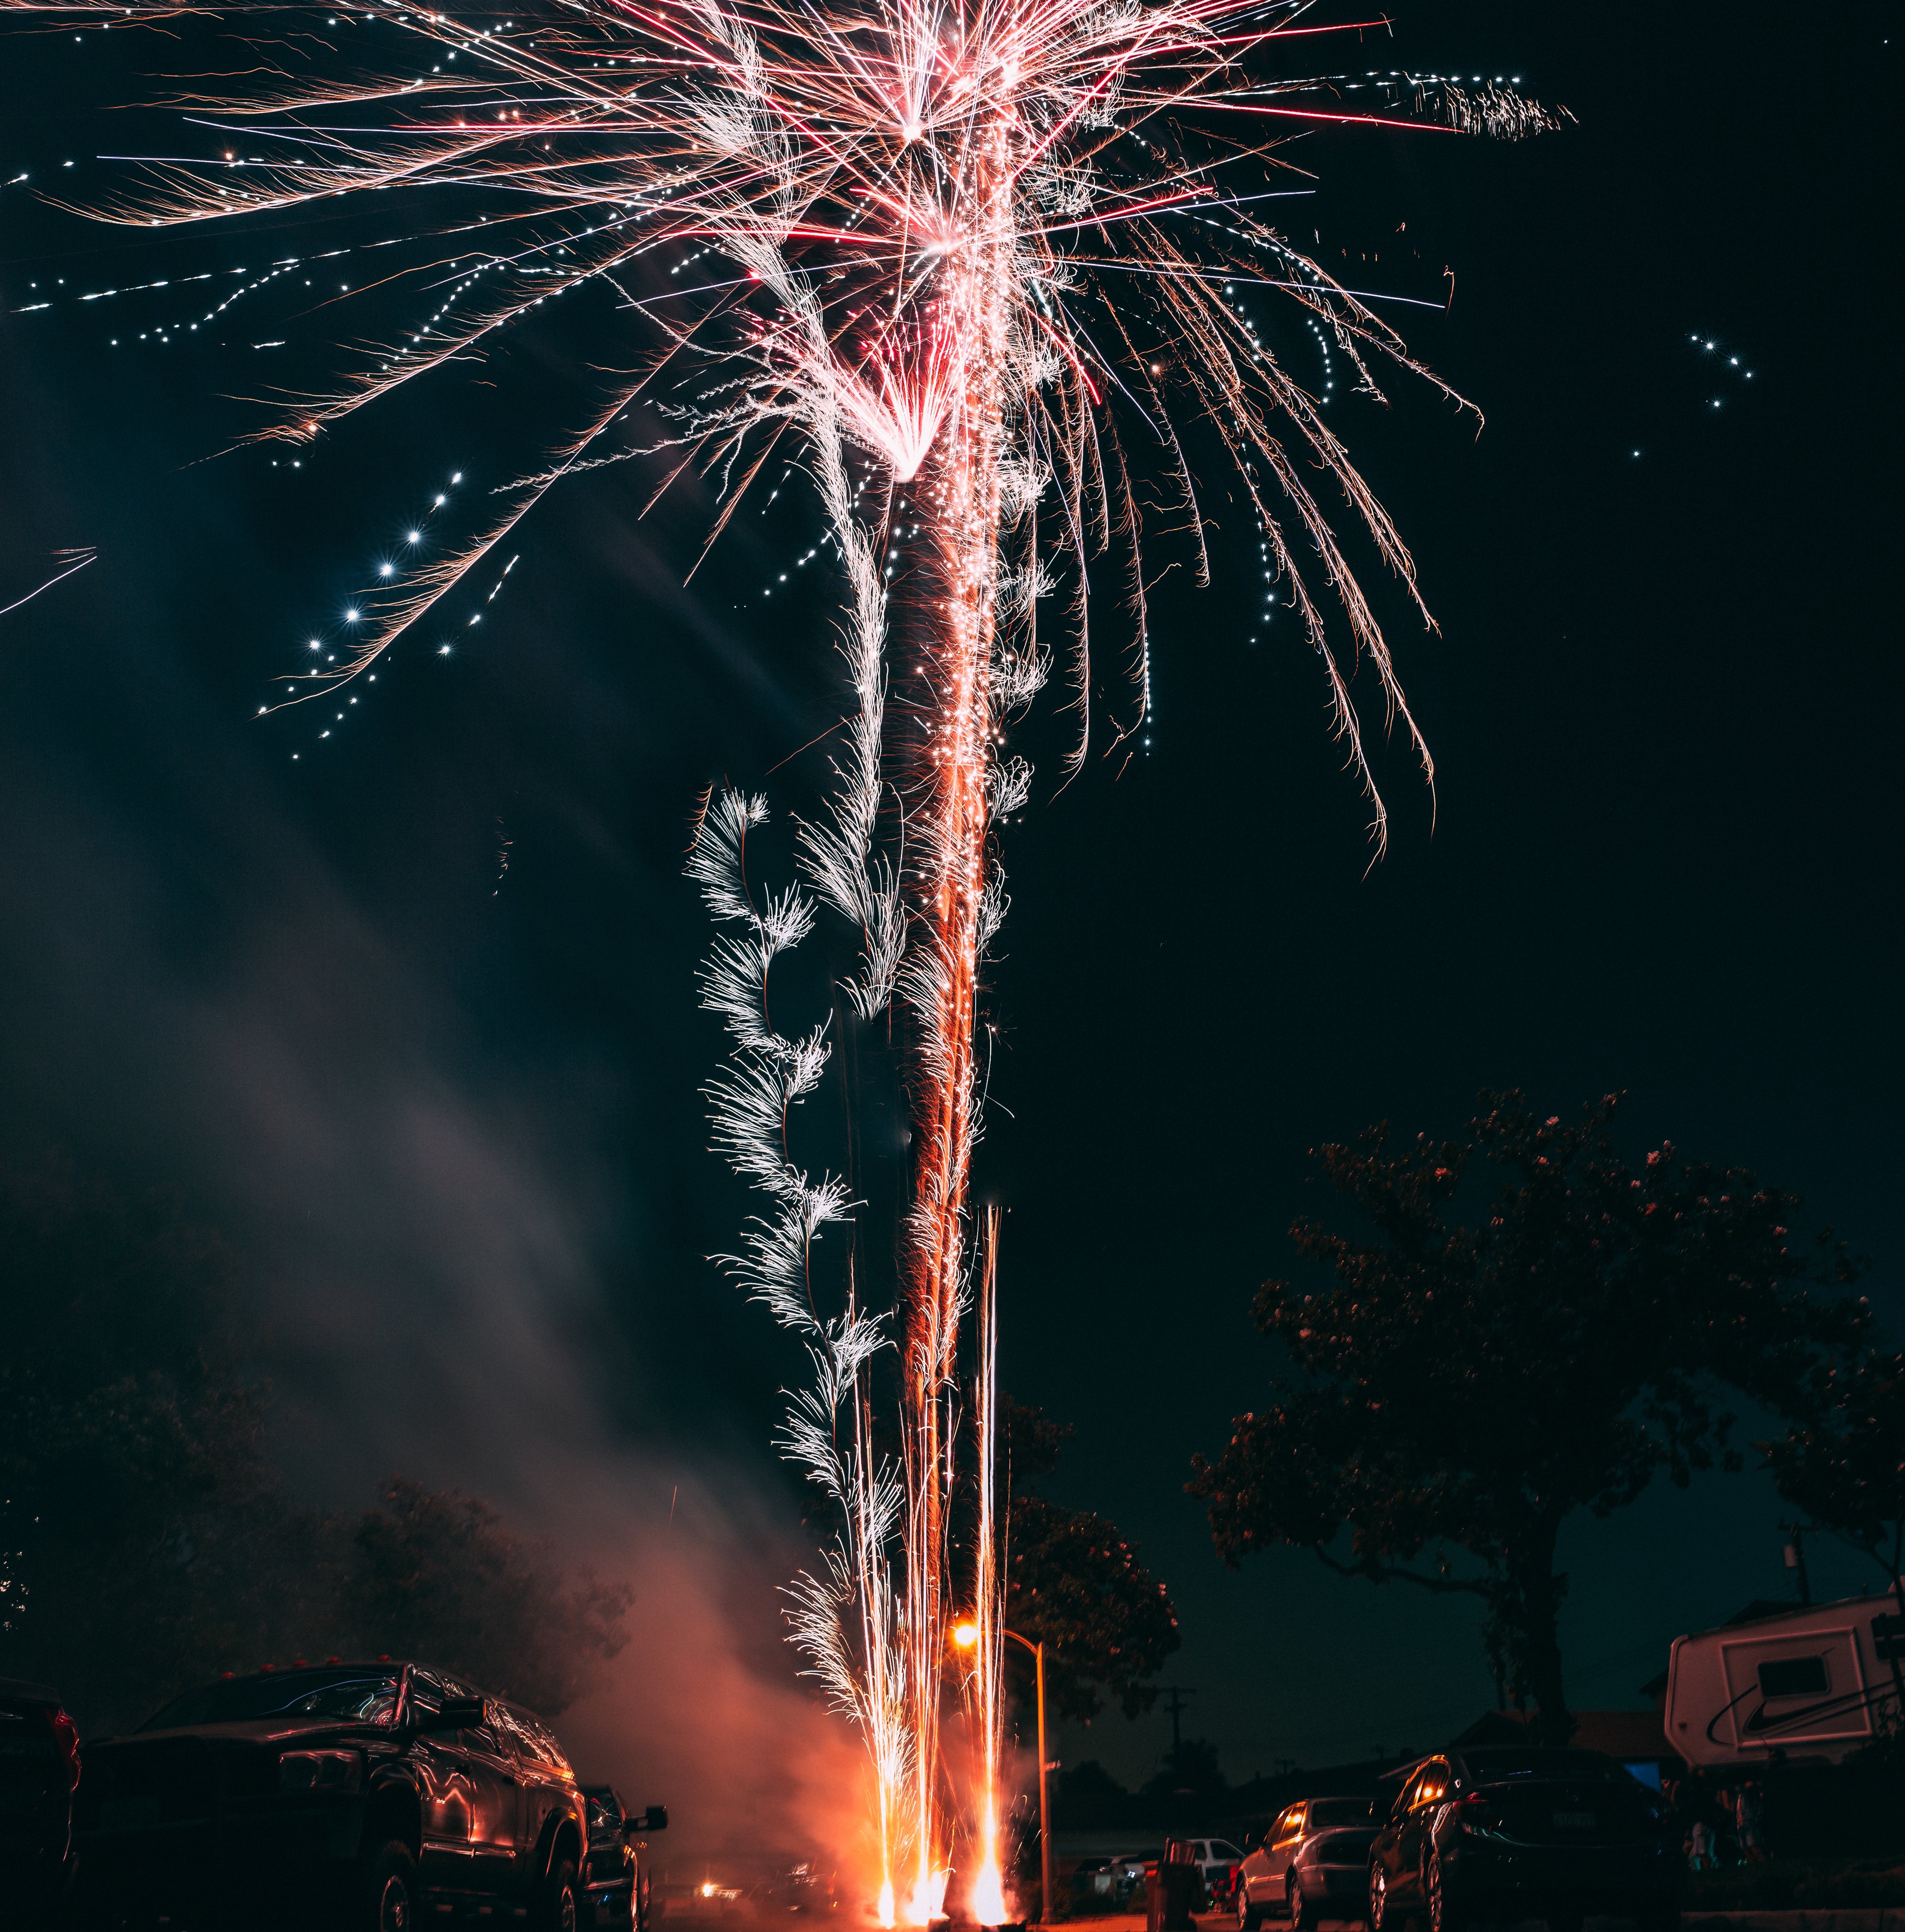 Phone Wallpaper (No watermarks) holiday, fireworks, sparks, night